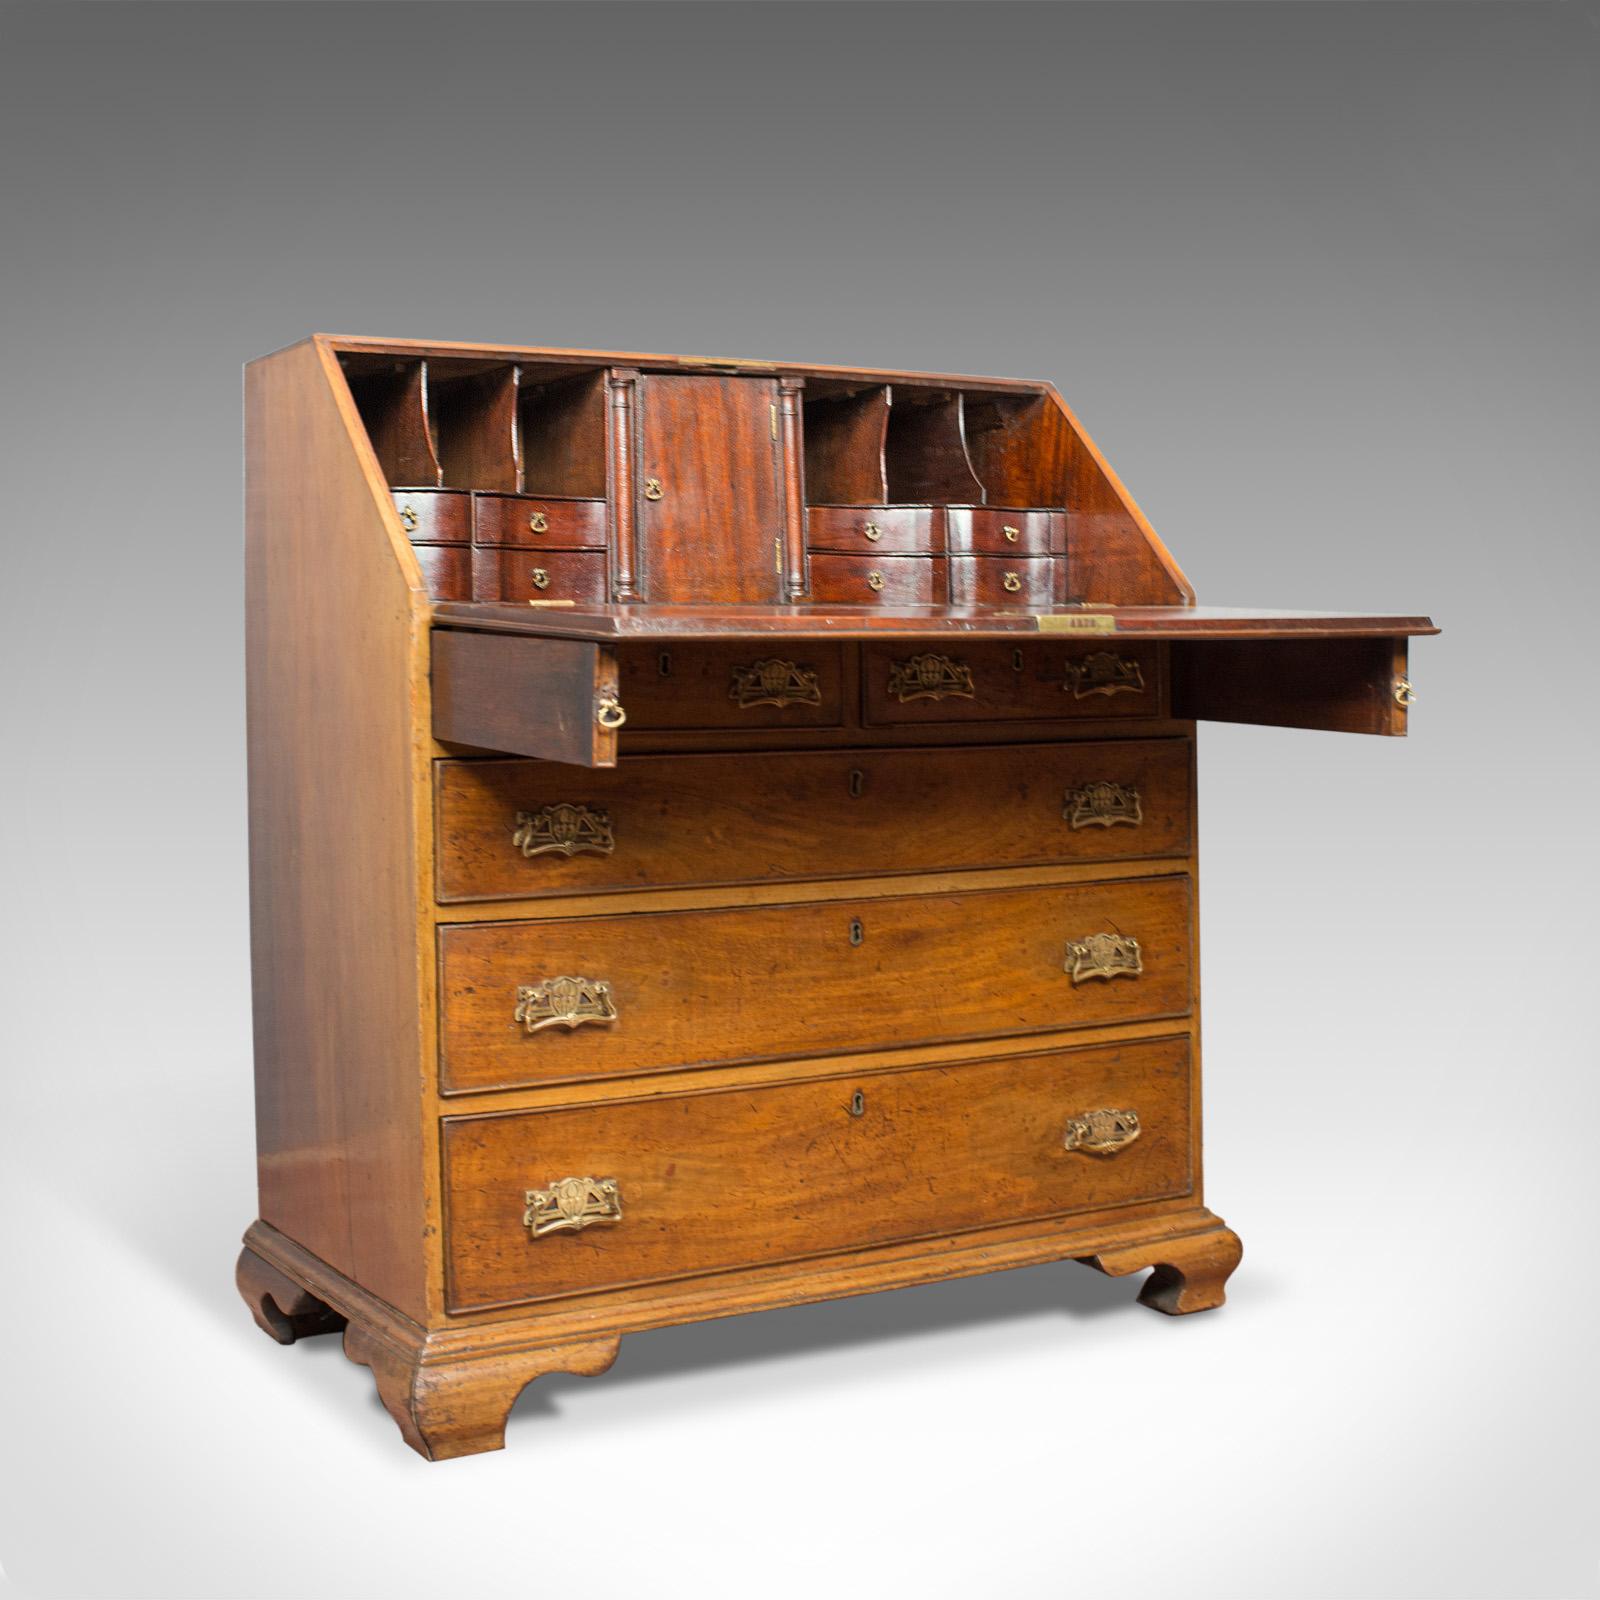 This is an antique bureau in mahogany. An English, late Georgian desk featuring secret compartments, dating to late 18th century, circa 1780.

Quality craftsmanship in polished walnut
Good consistent colour and grain interest throughout
Generous